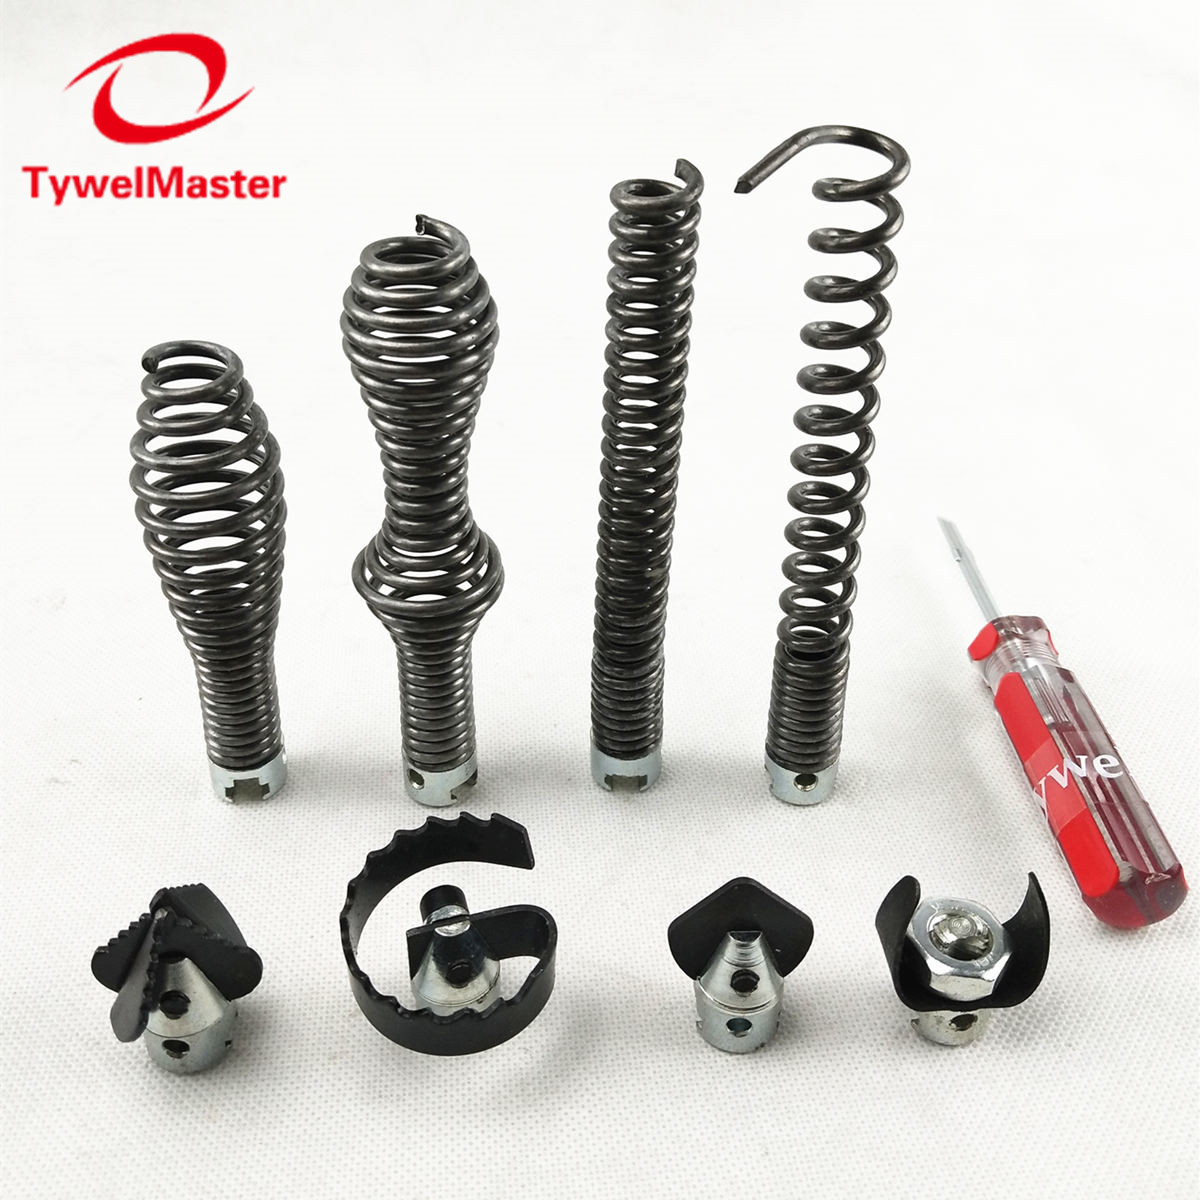 Sewer Snake Machine Accessories Soft Shaft 16mm 8pcs/PK Straight Bulb Restrieving Auger Blade Grease Sawtooth Cutter Pipe Clean